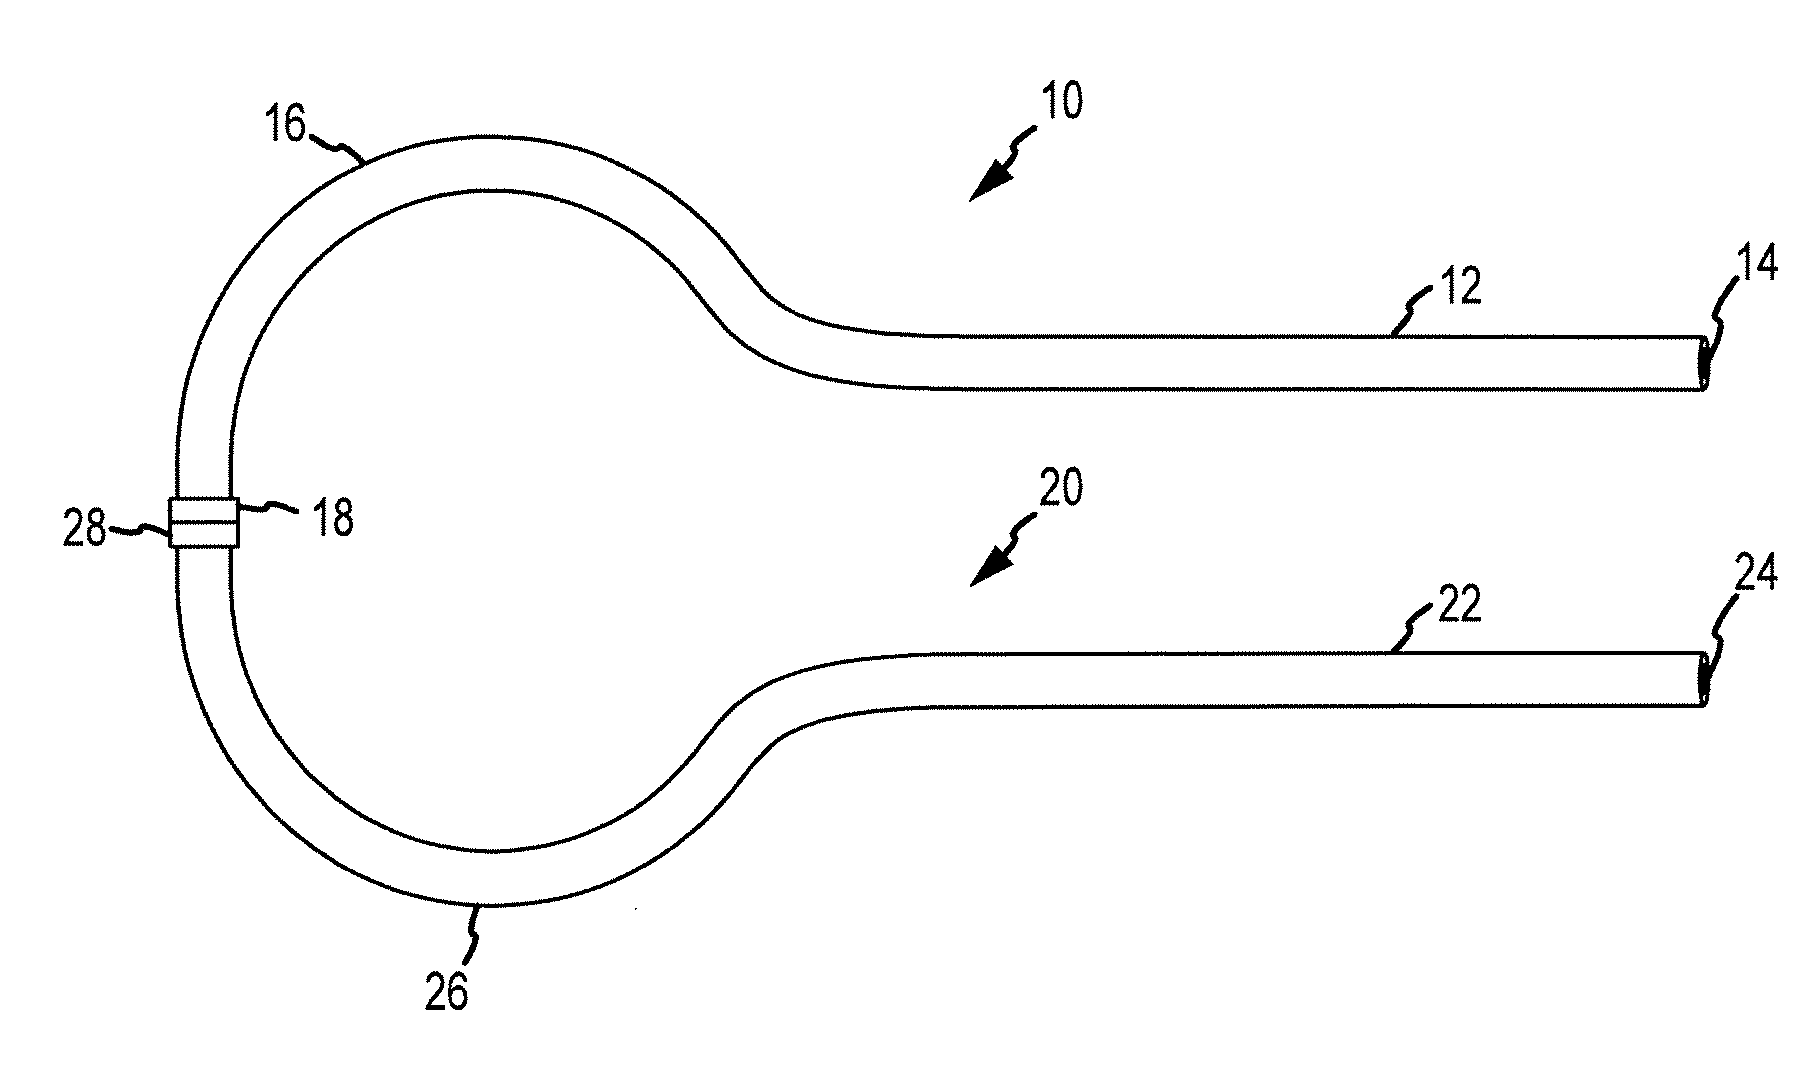 Cable clamping device and method of its use